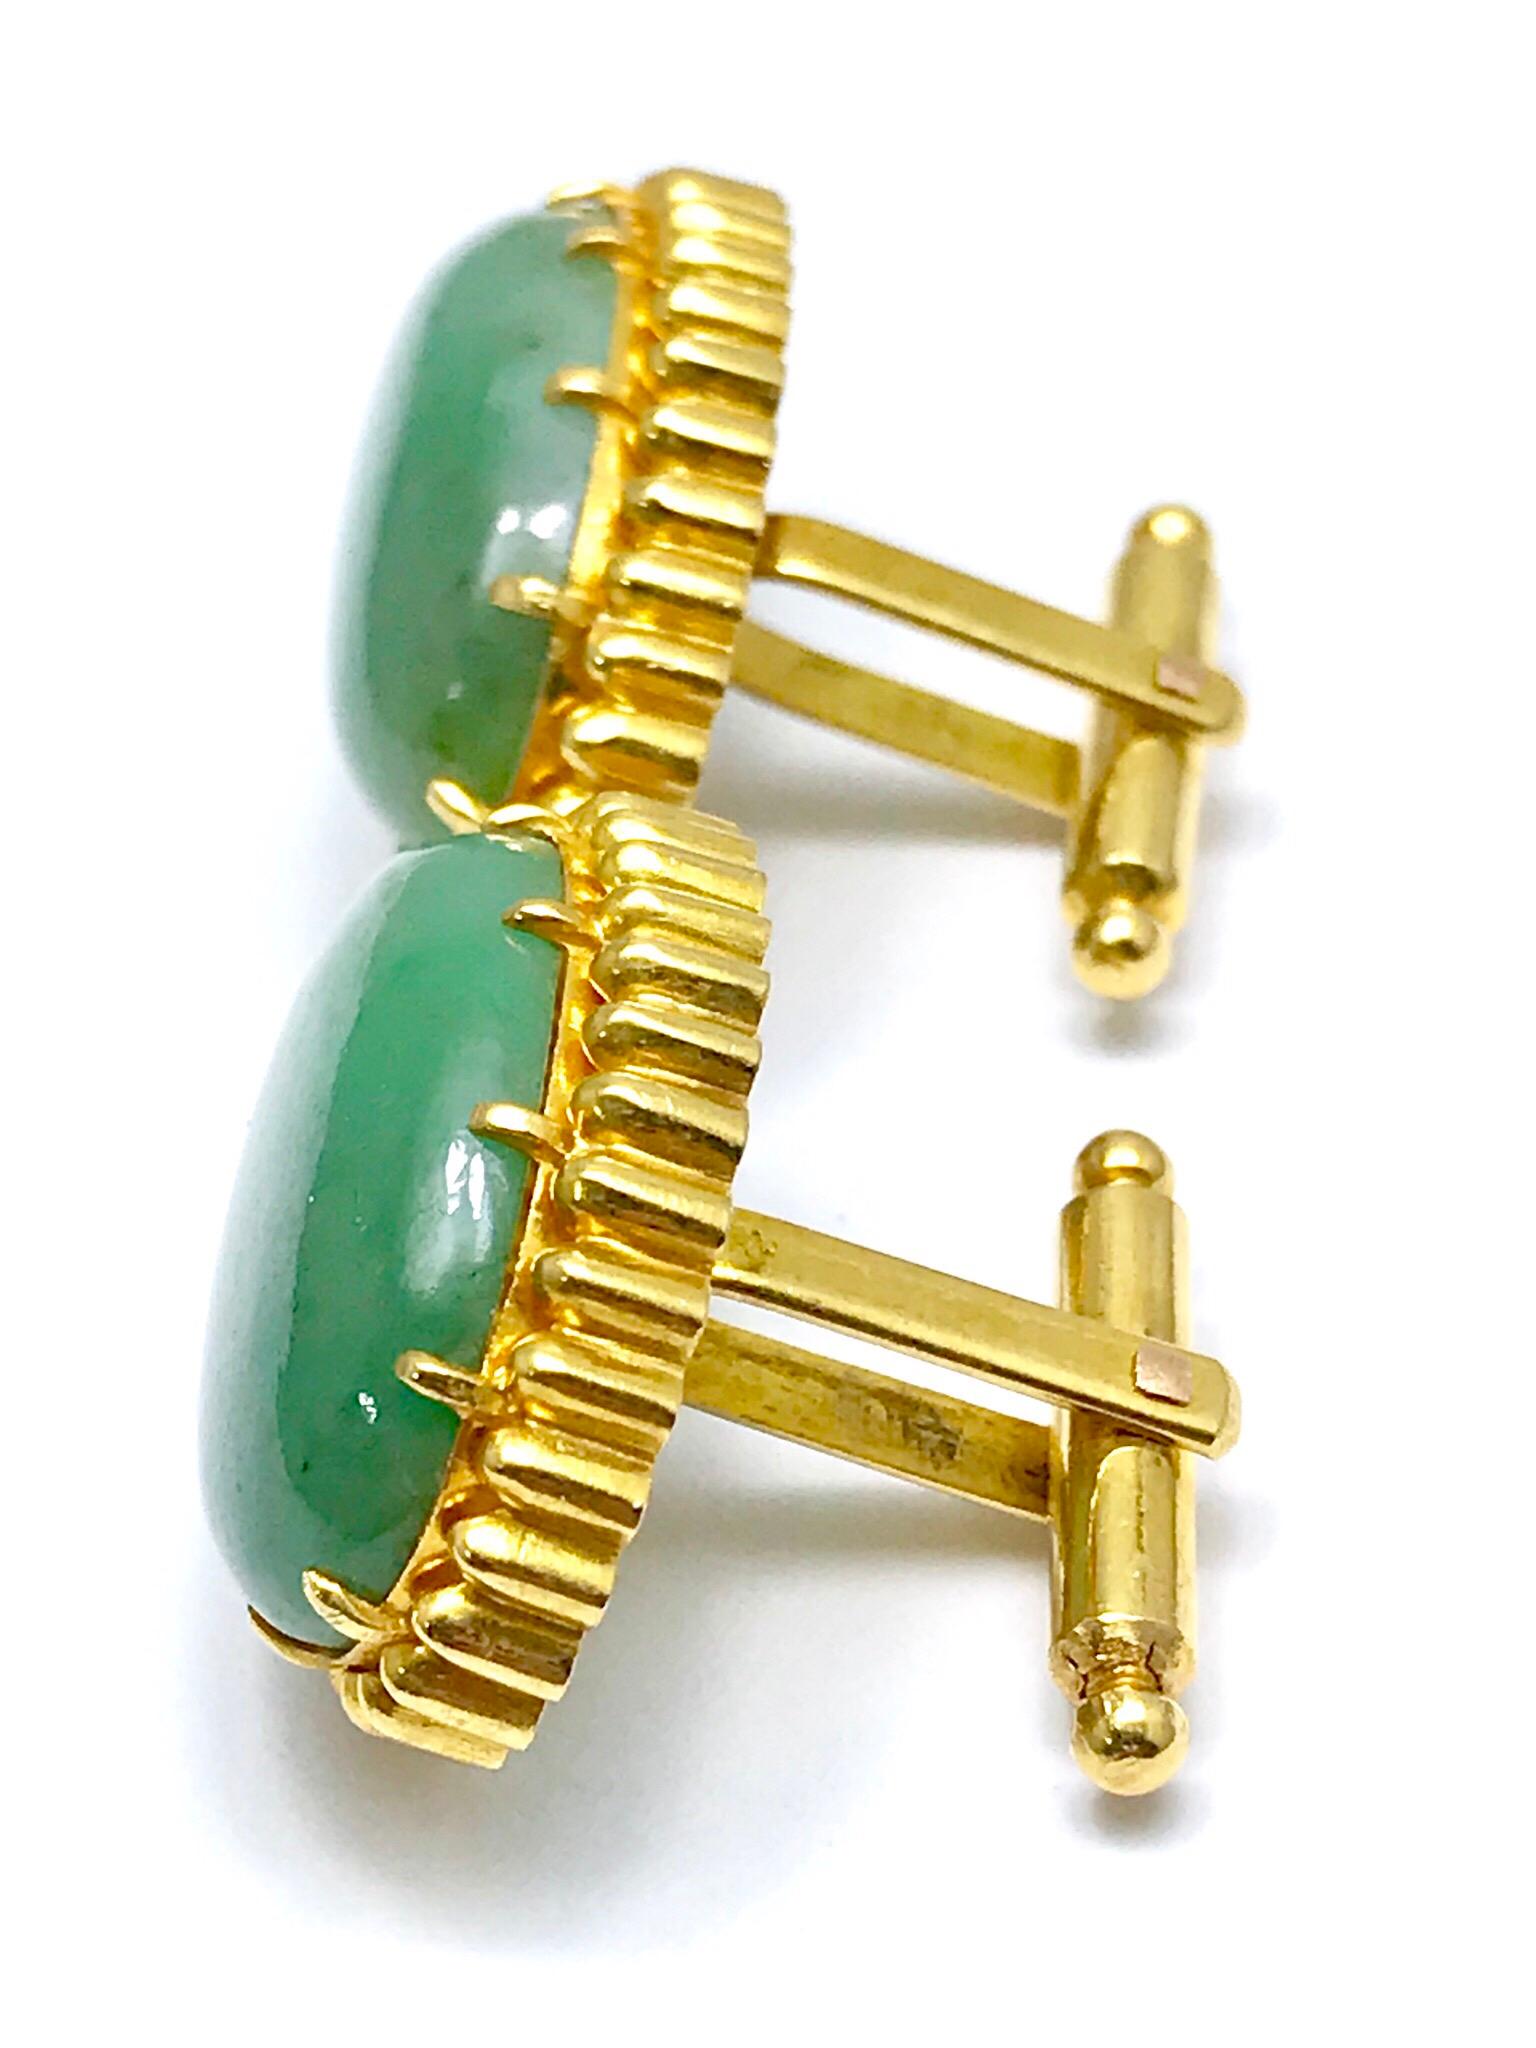 A fantastic pair of oval cabochon Jade and 18 karat yellow gold cufflink set.  Great for anyone and any occasion.  The Jade measures 20.80 x 13.50mm, and are prong set with a textured gold frame and a toggle back.  The matching stud set is